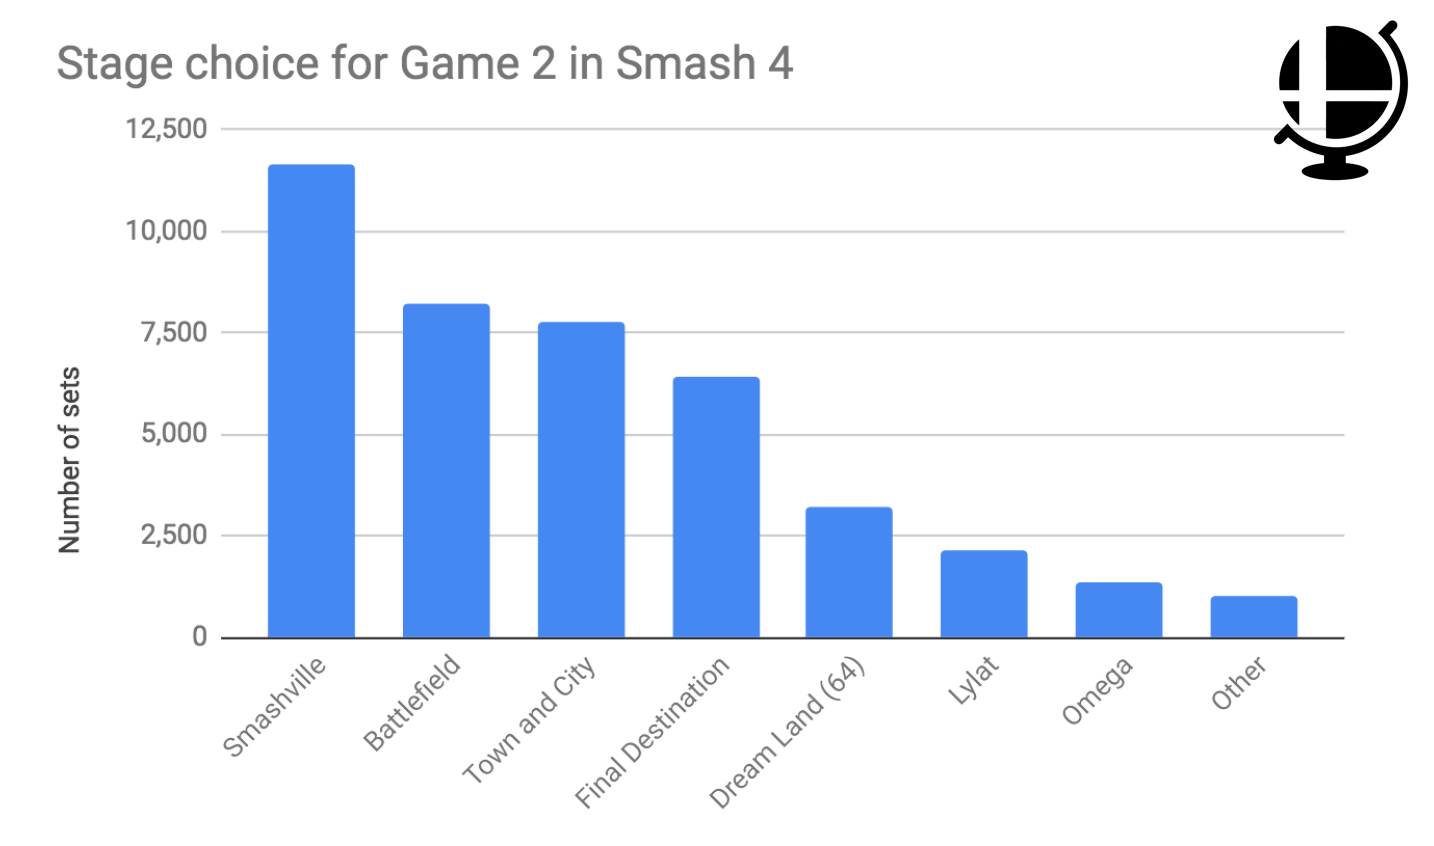 Stage usage for game 2 in Smash bros sets